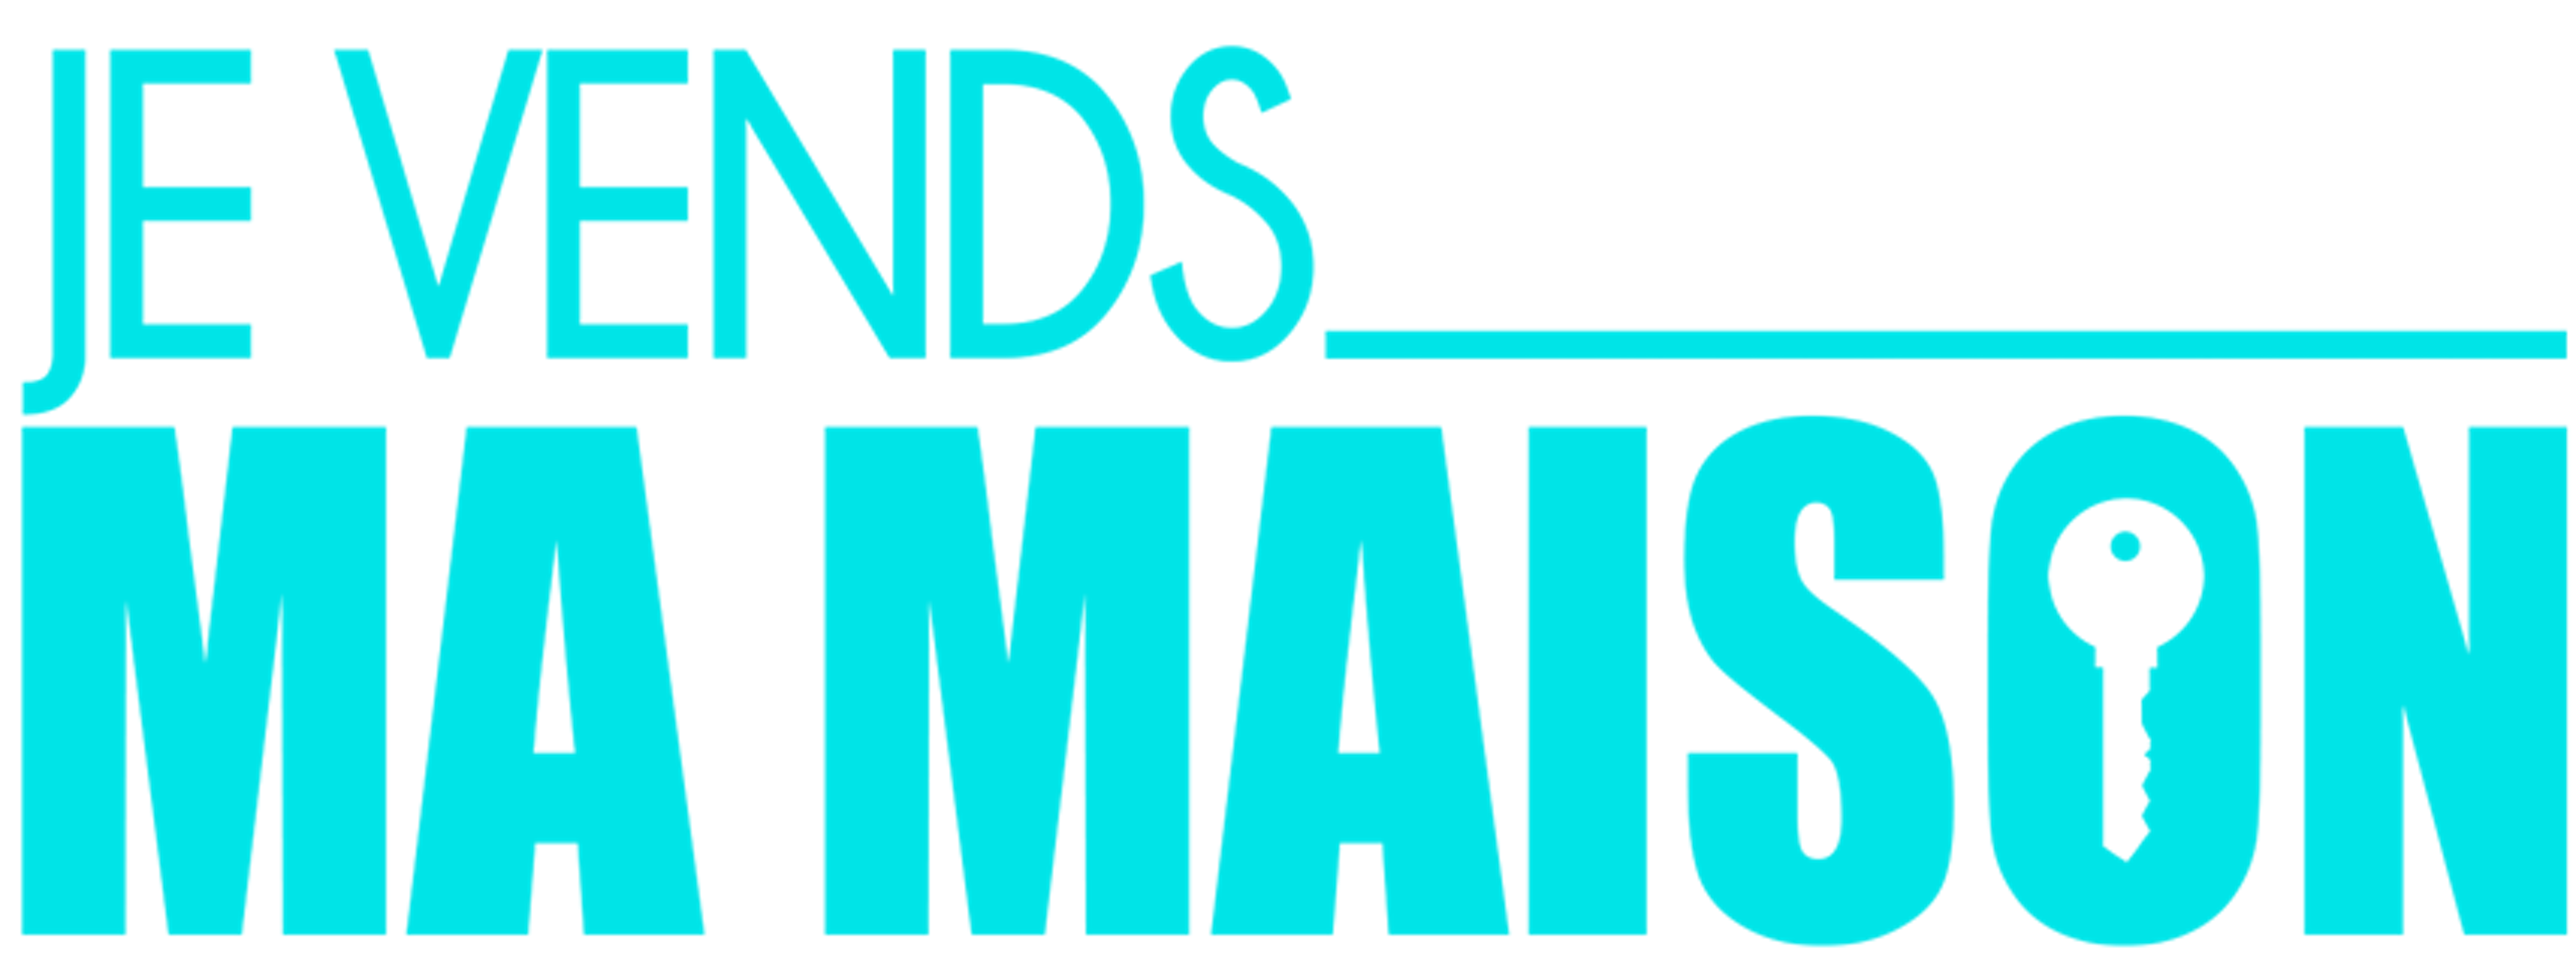 Je Vends Ma Maison's logo, a RTL TVI show in co-production with We Invest. The logo is blue with a key in the middle of the O of "Maison".